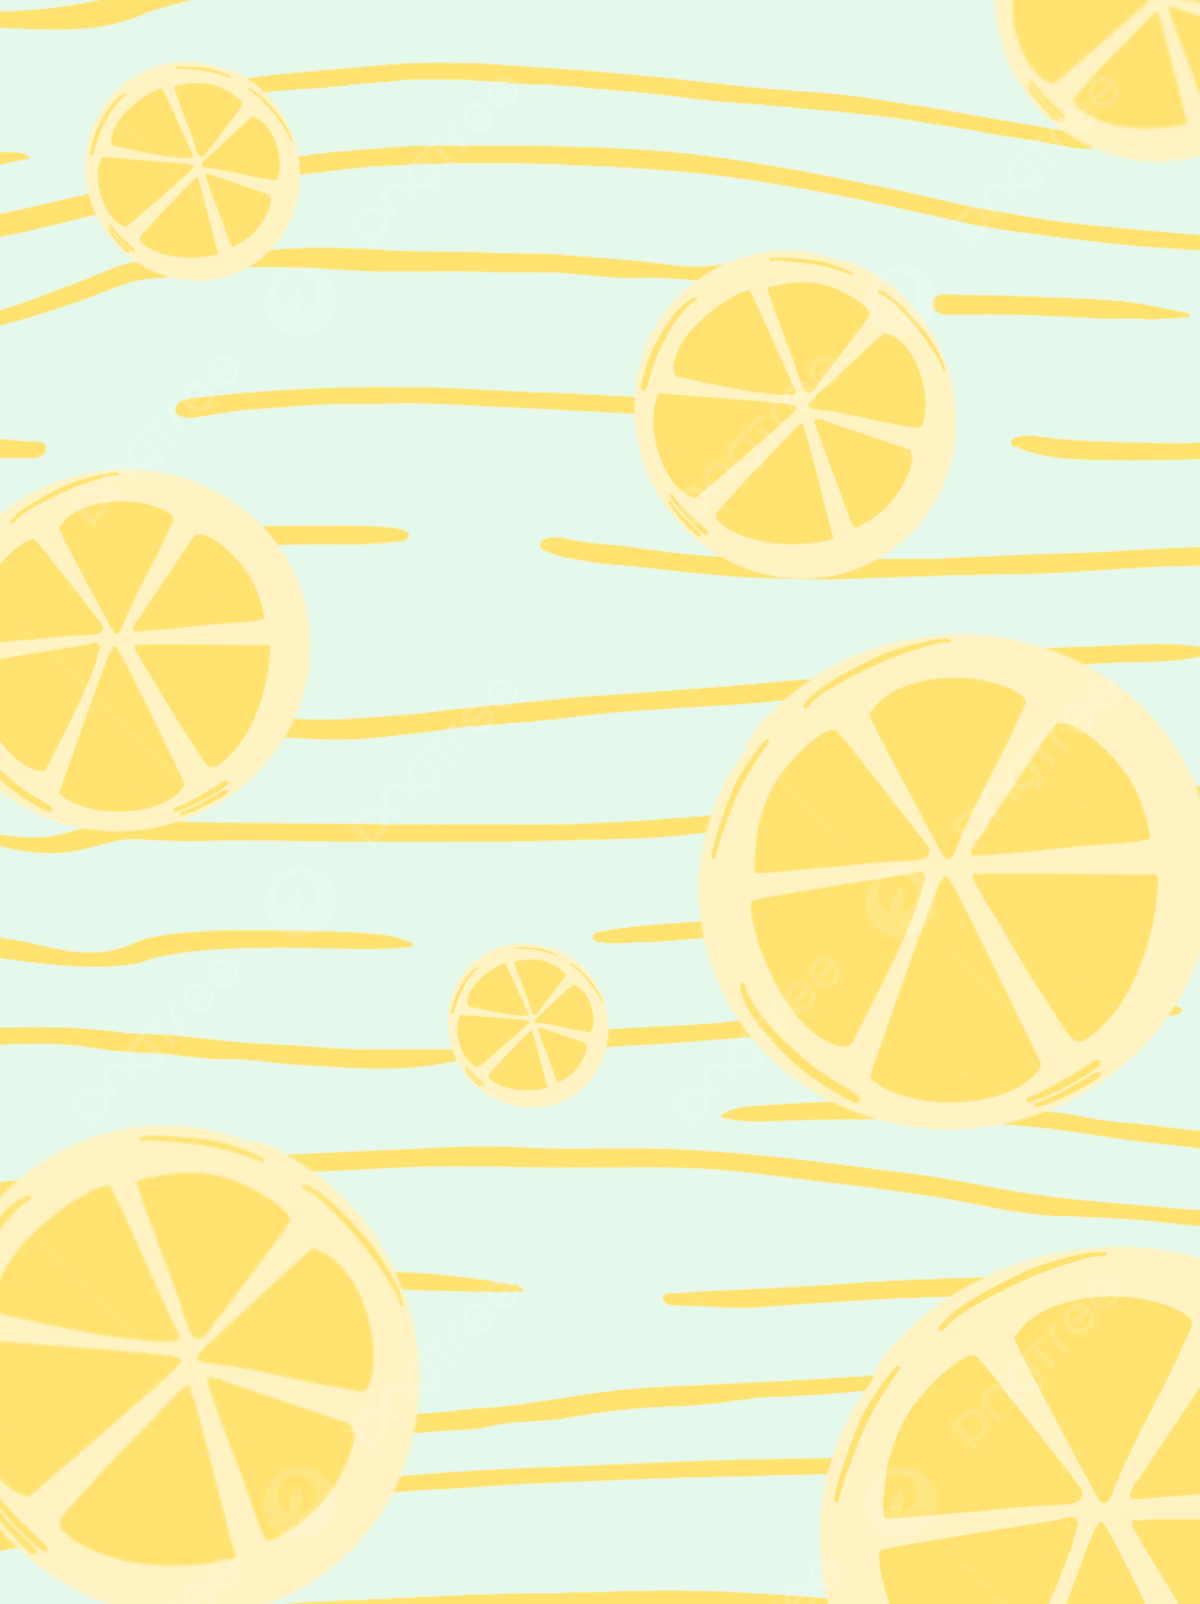 Lemon Wallpaper Background Image, HD Picture and Wallpaper For Free Download